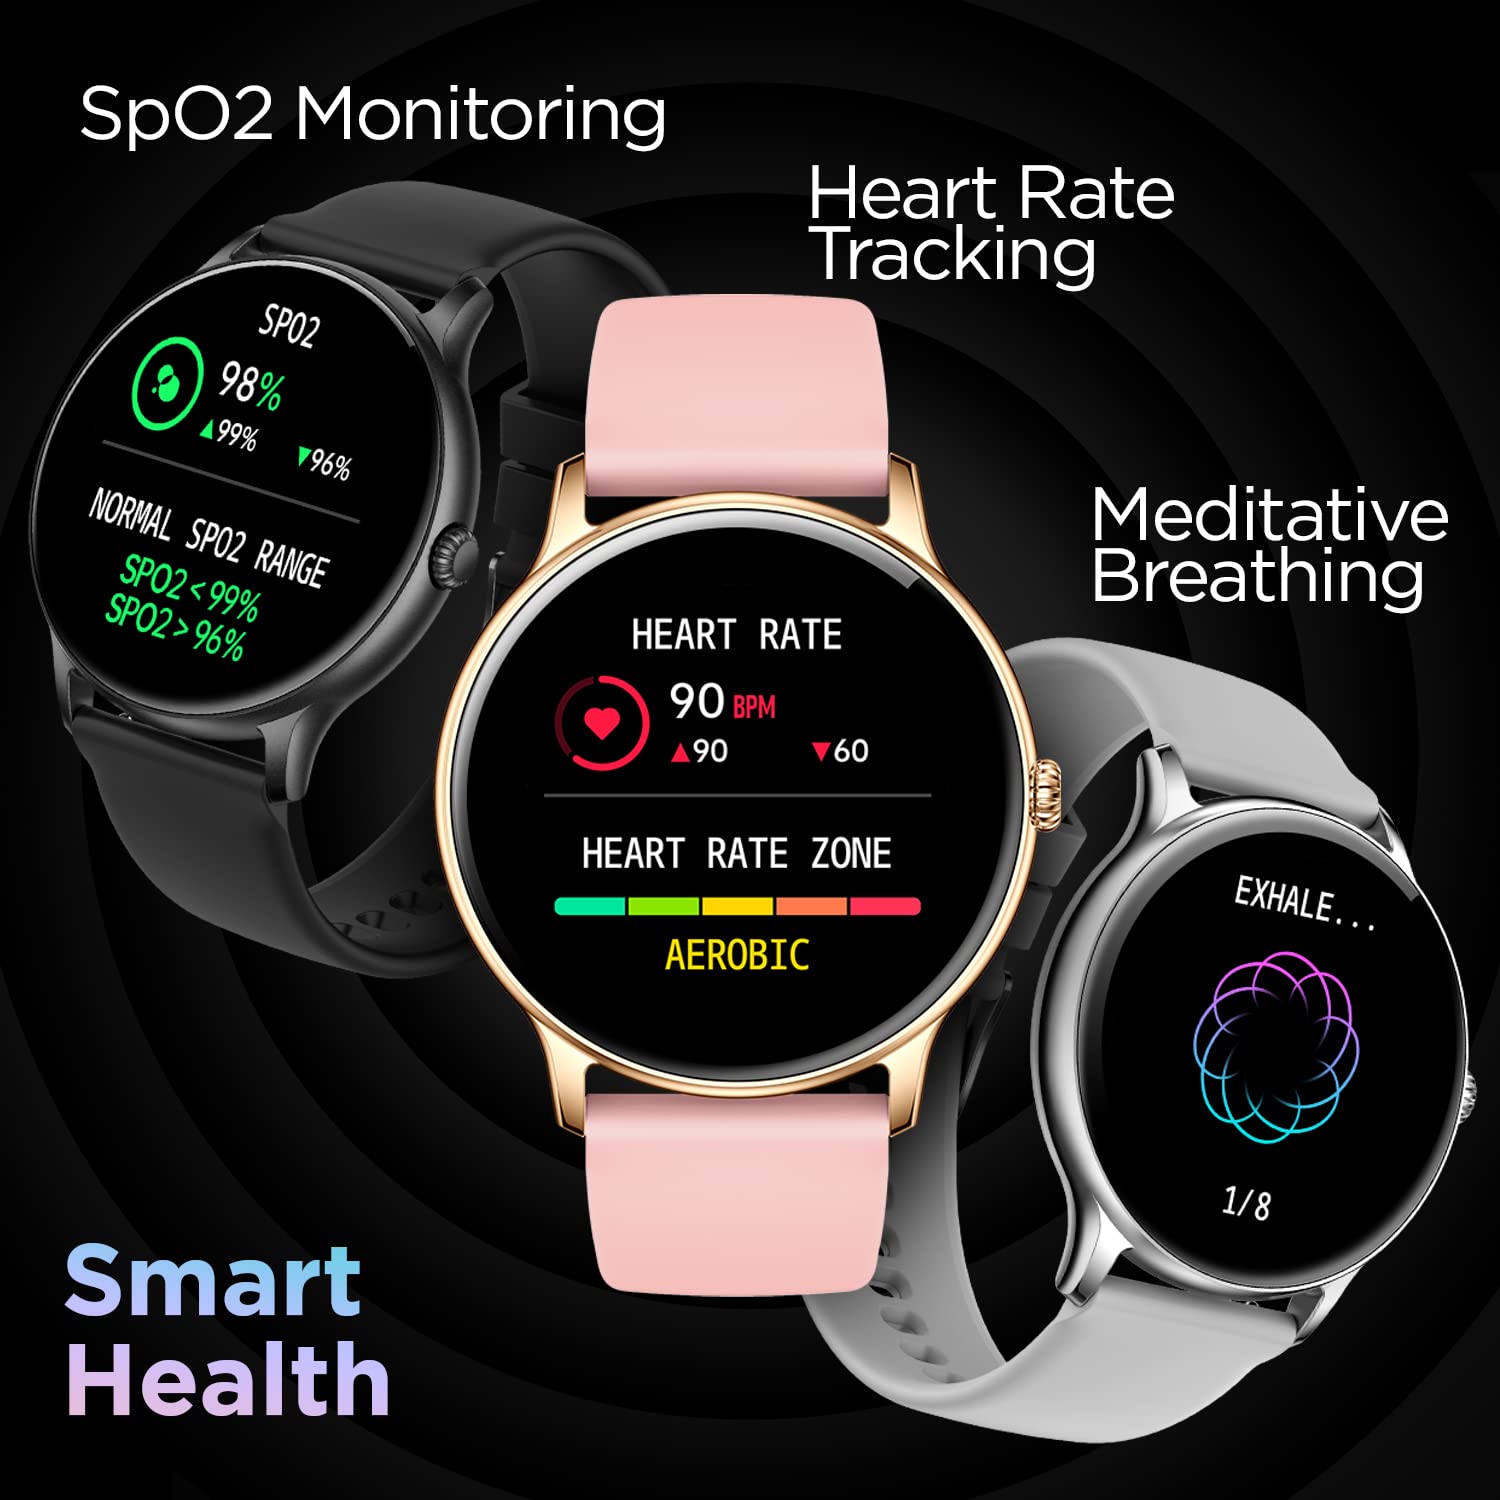 FireBoltt Phoenix Bluetooth Calling Smartwatch 1.3" 240*240 PX High Res with 120+ Sports Modes, SpO2, Heart Rate Monitoring & IP68 Rating